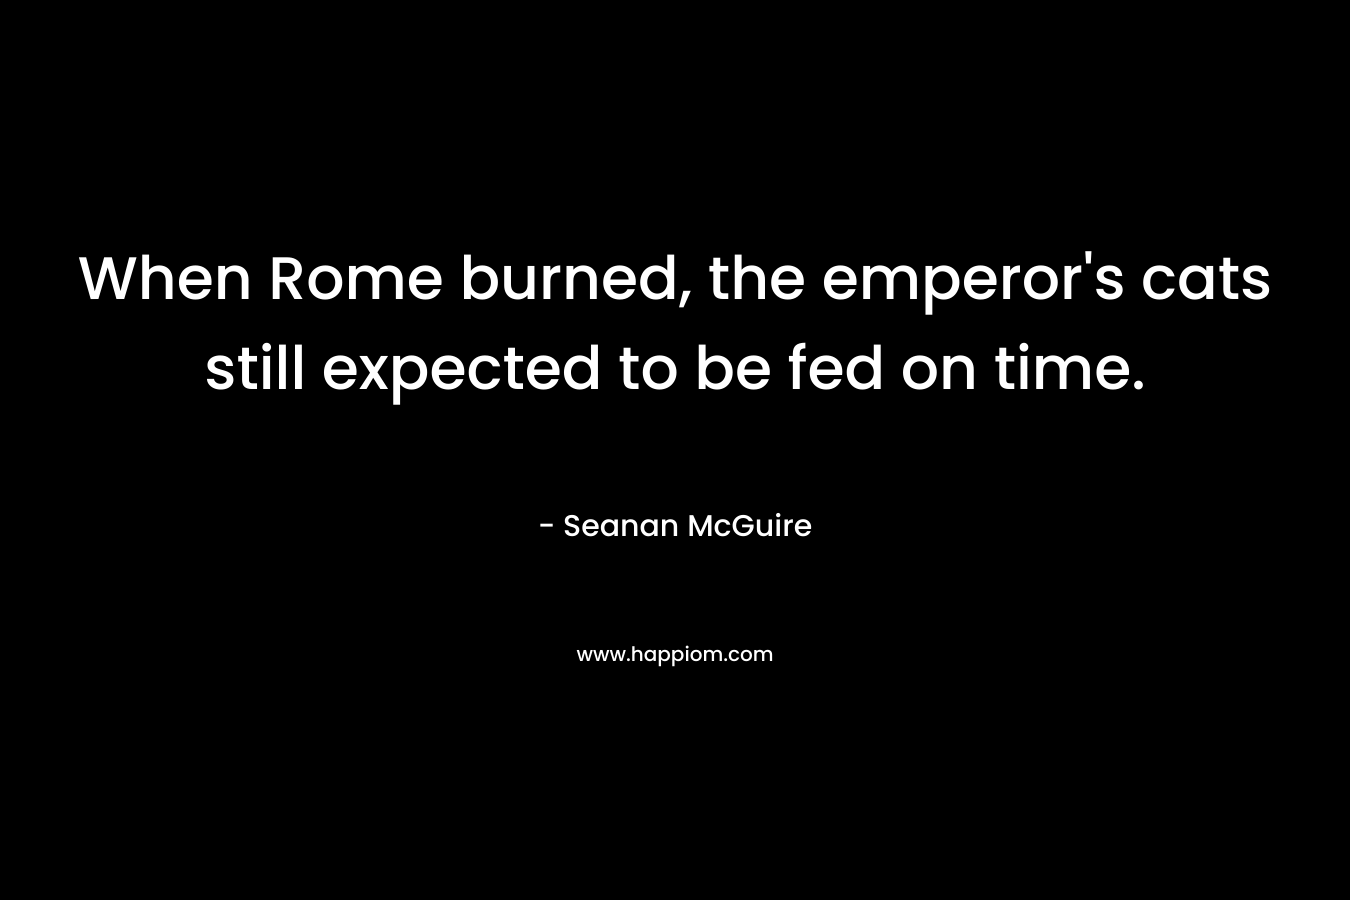 When Rome burned, the emperor’s cats still expected to be fed on time. – Seanan McGuire